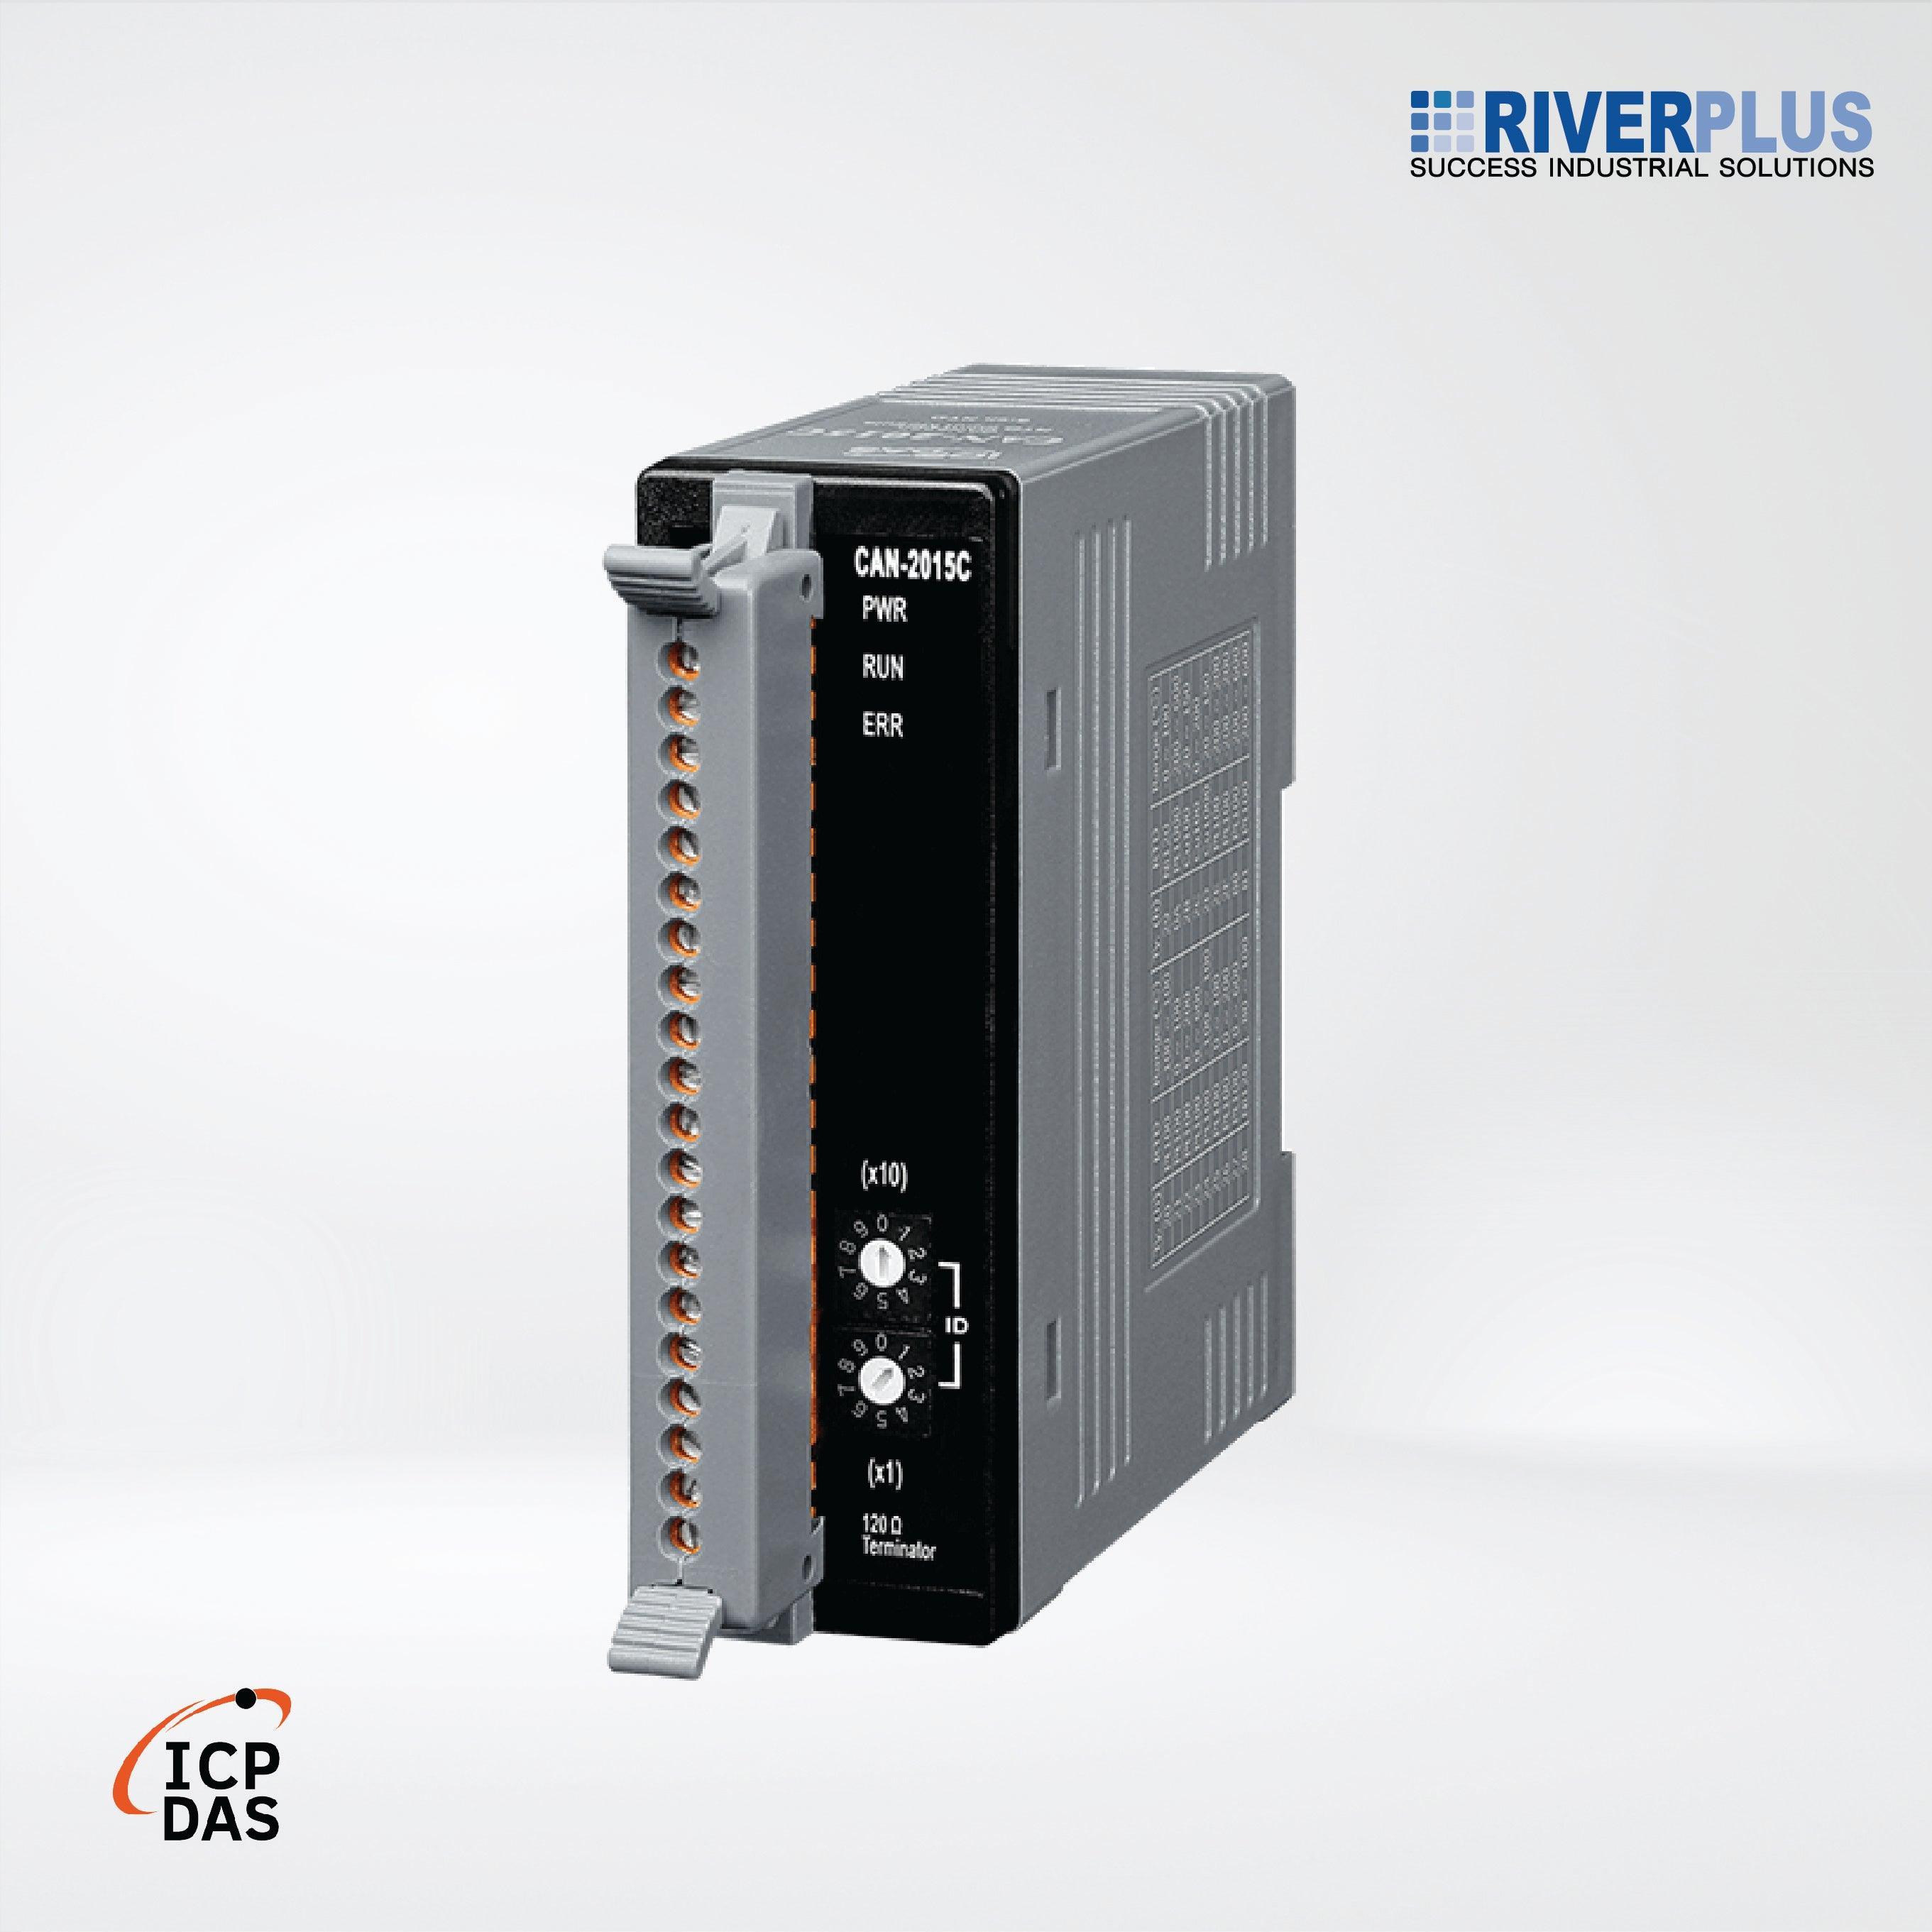 CAN-2015C CANopen Slave Module of 8-channel RTD Input - Riverplus